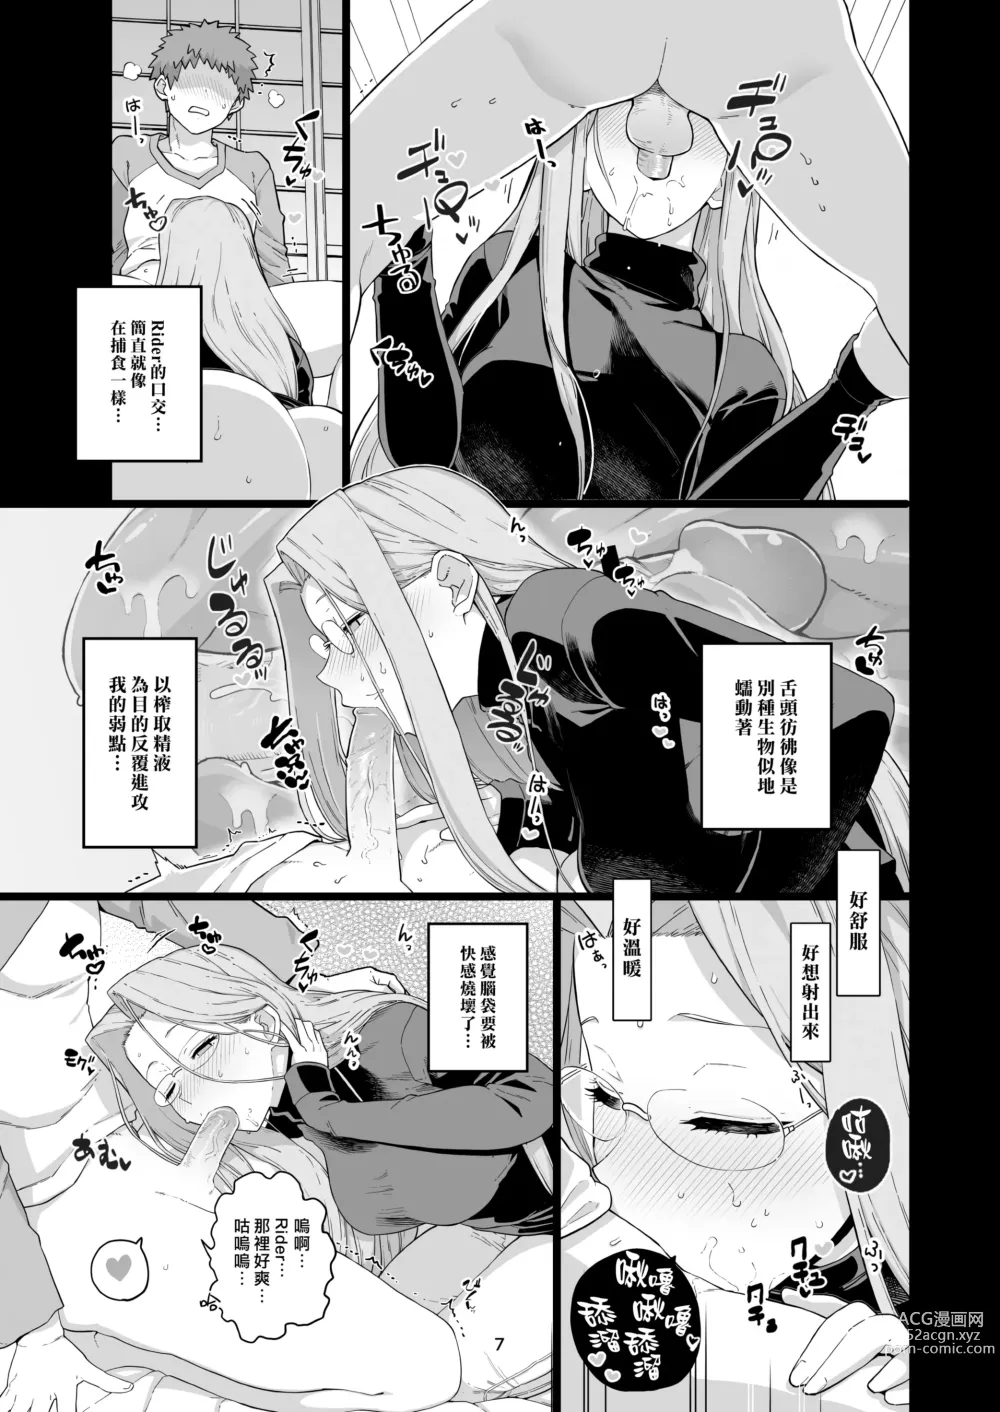 Page 10 of doujinshi Rider小姐的偷吃 (decensored)